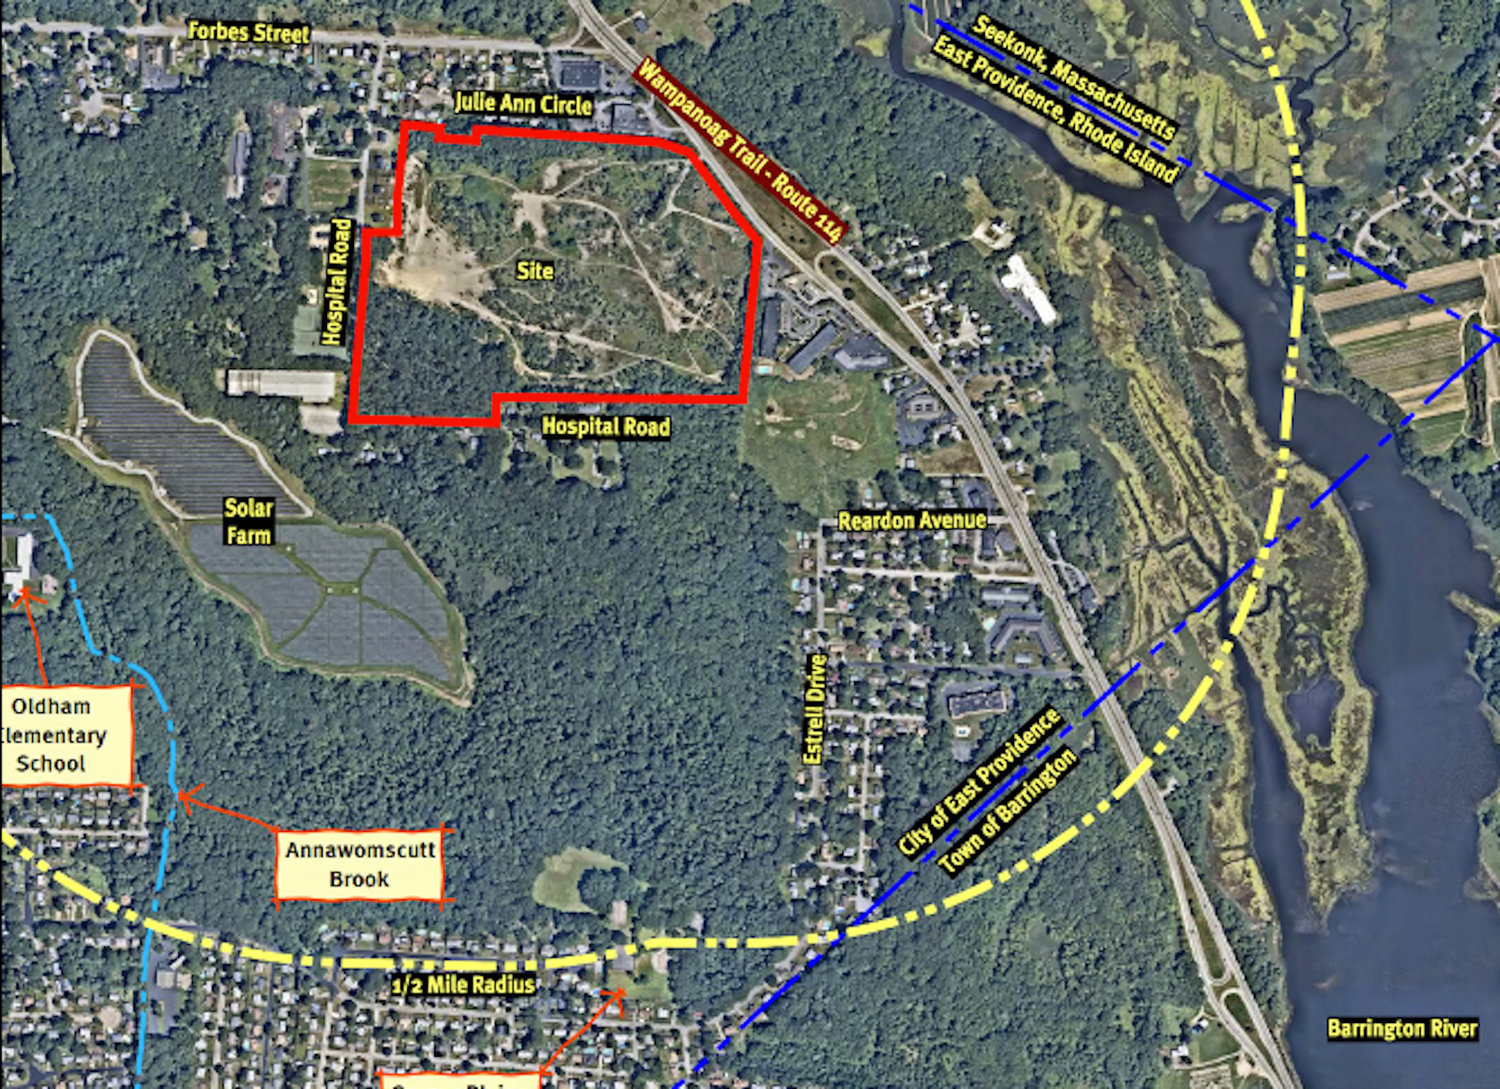 An architectural overlay of the proposed Wampanoag Meadows site.